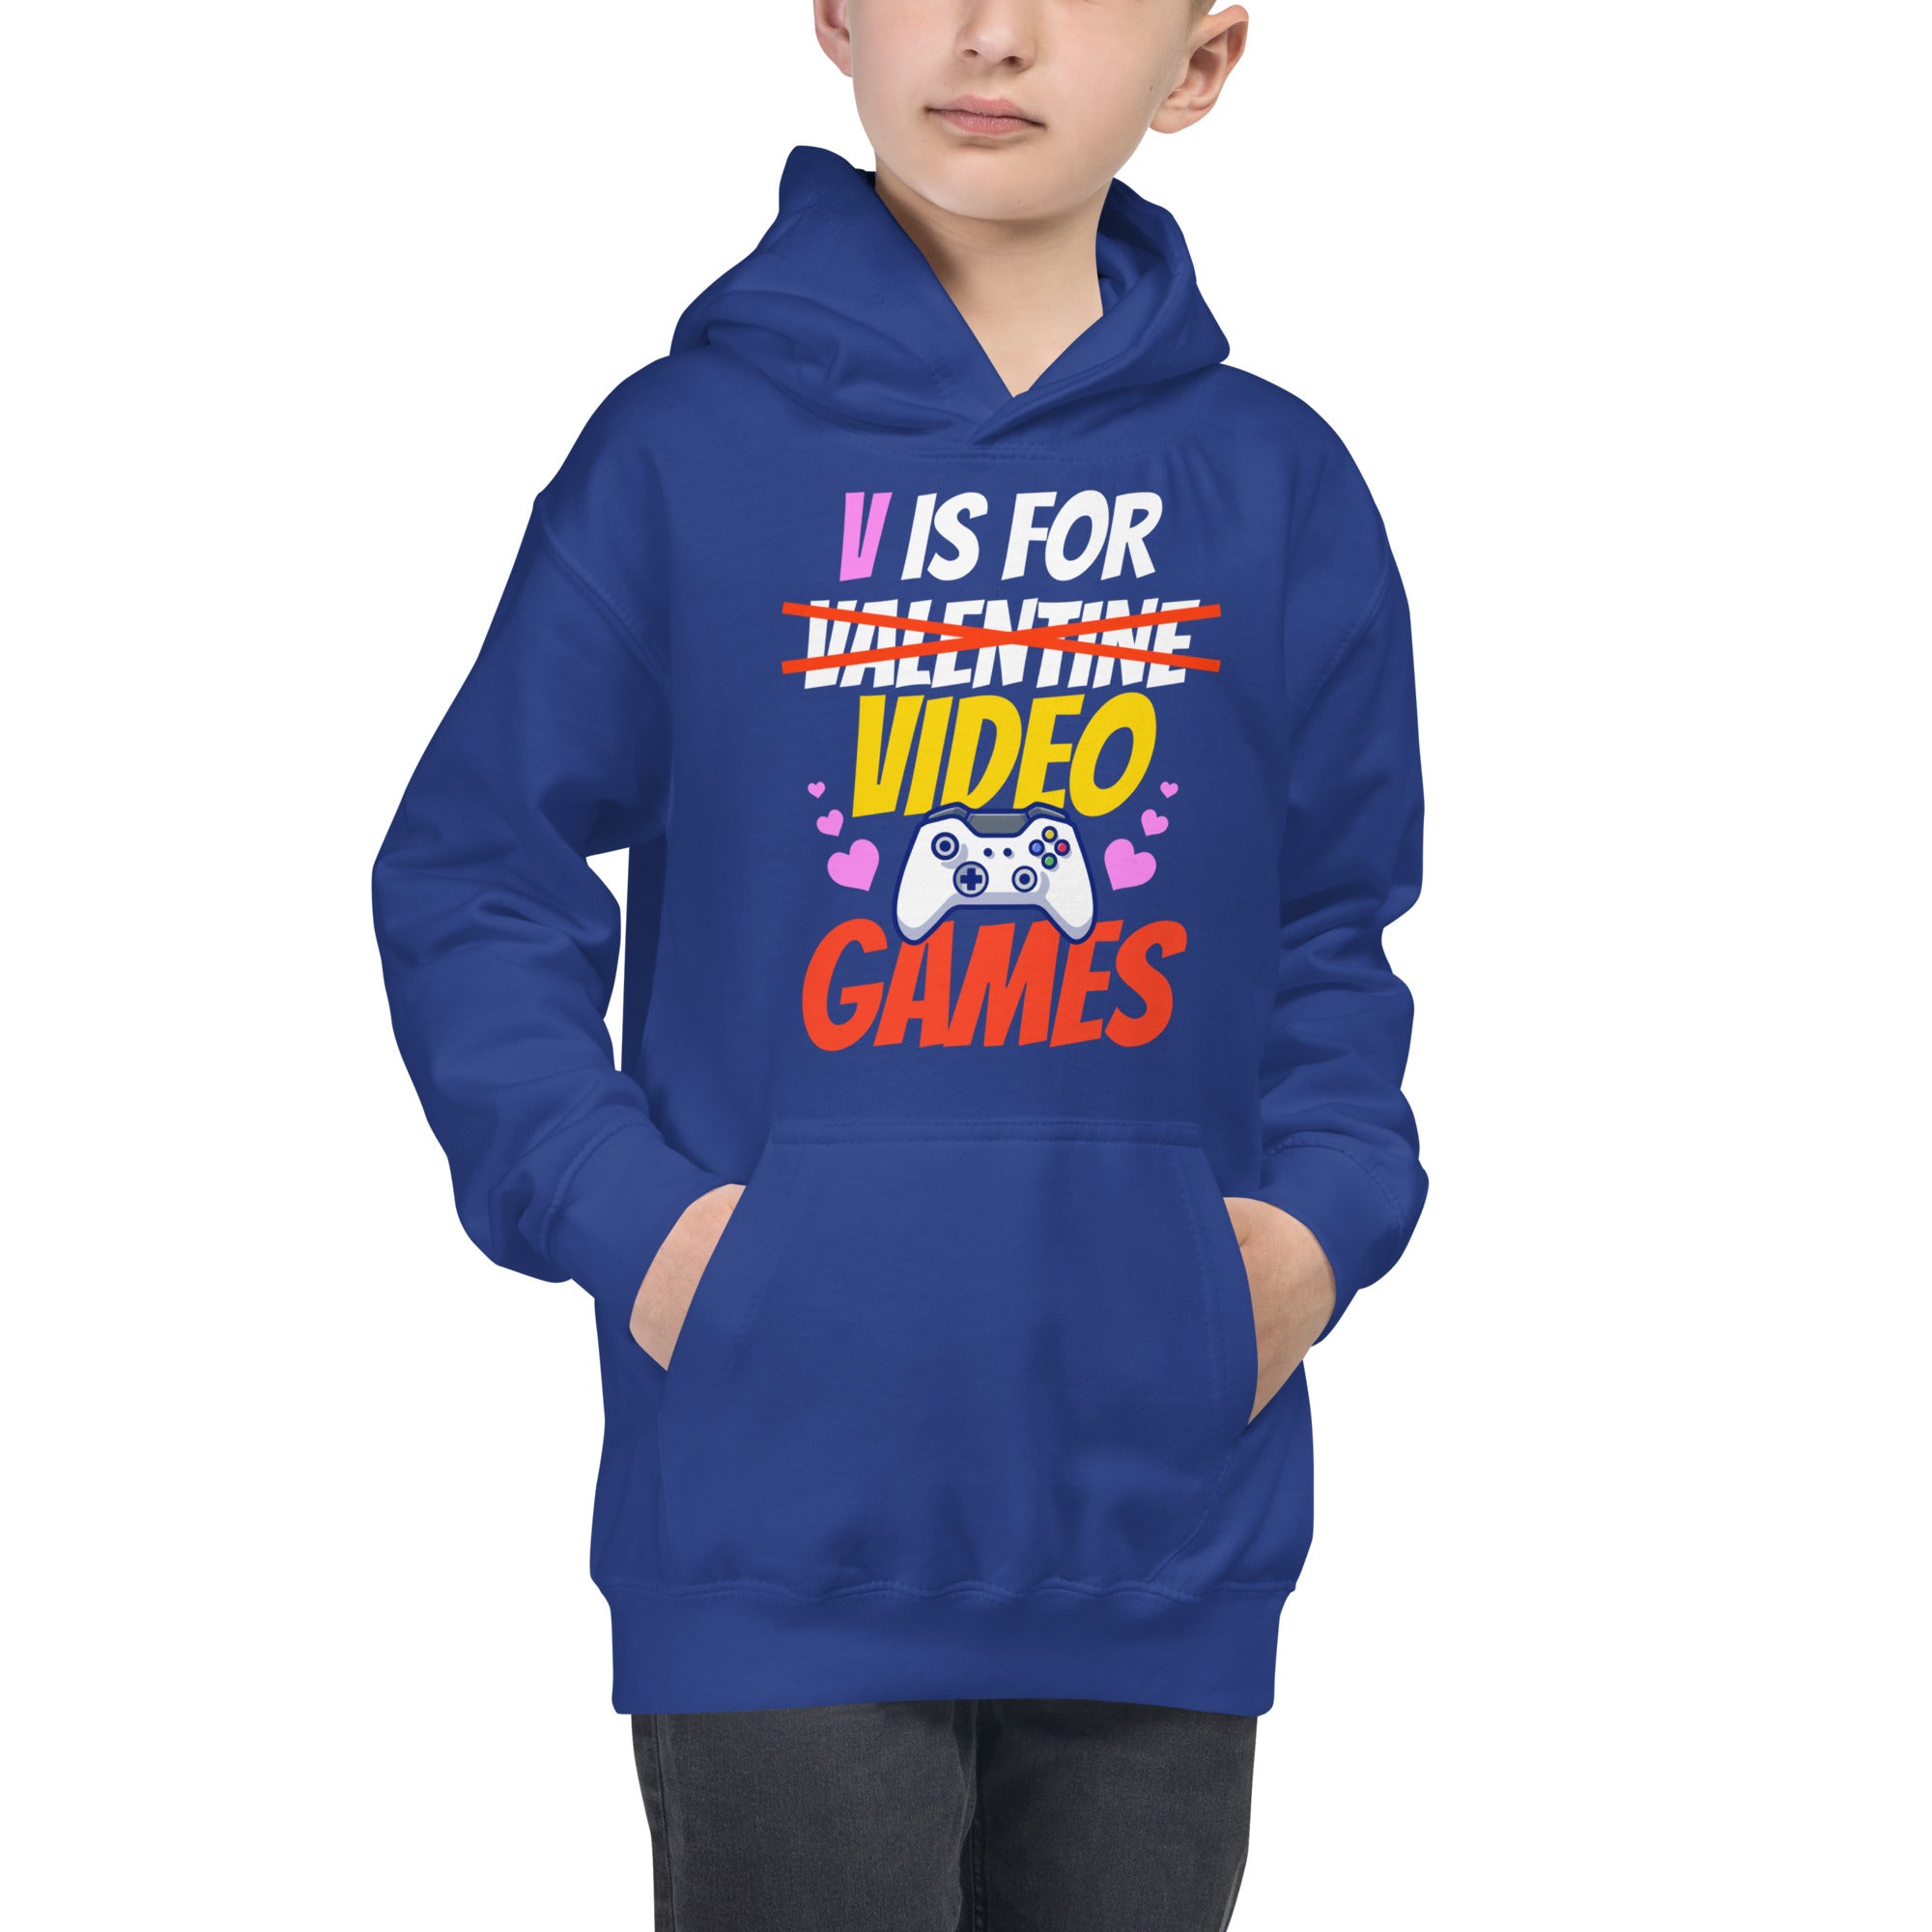 V is for Video Games, Video Game Kids Hoodie, Boys Valentine Shirt, Boys Valentines Day Gifts, Kids Valentine Day Hoodie, Kids Valentine - Madeinsea©